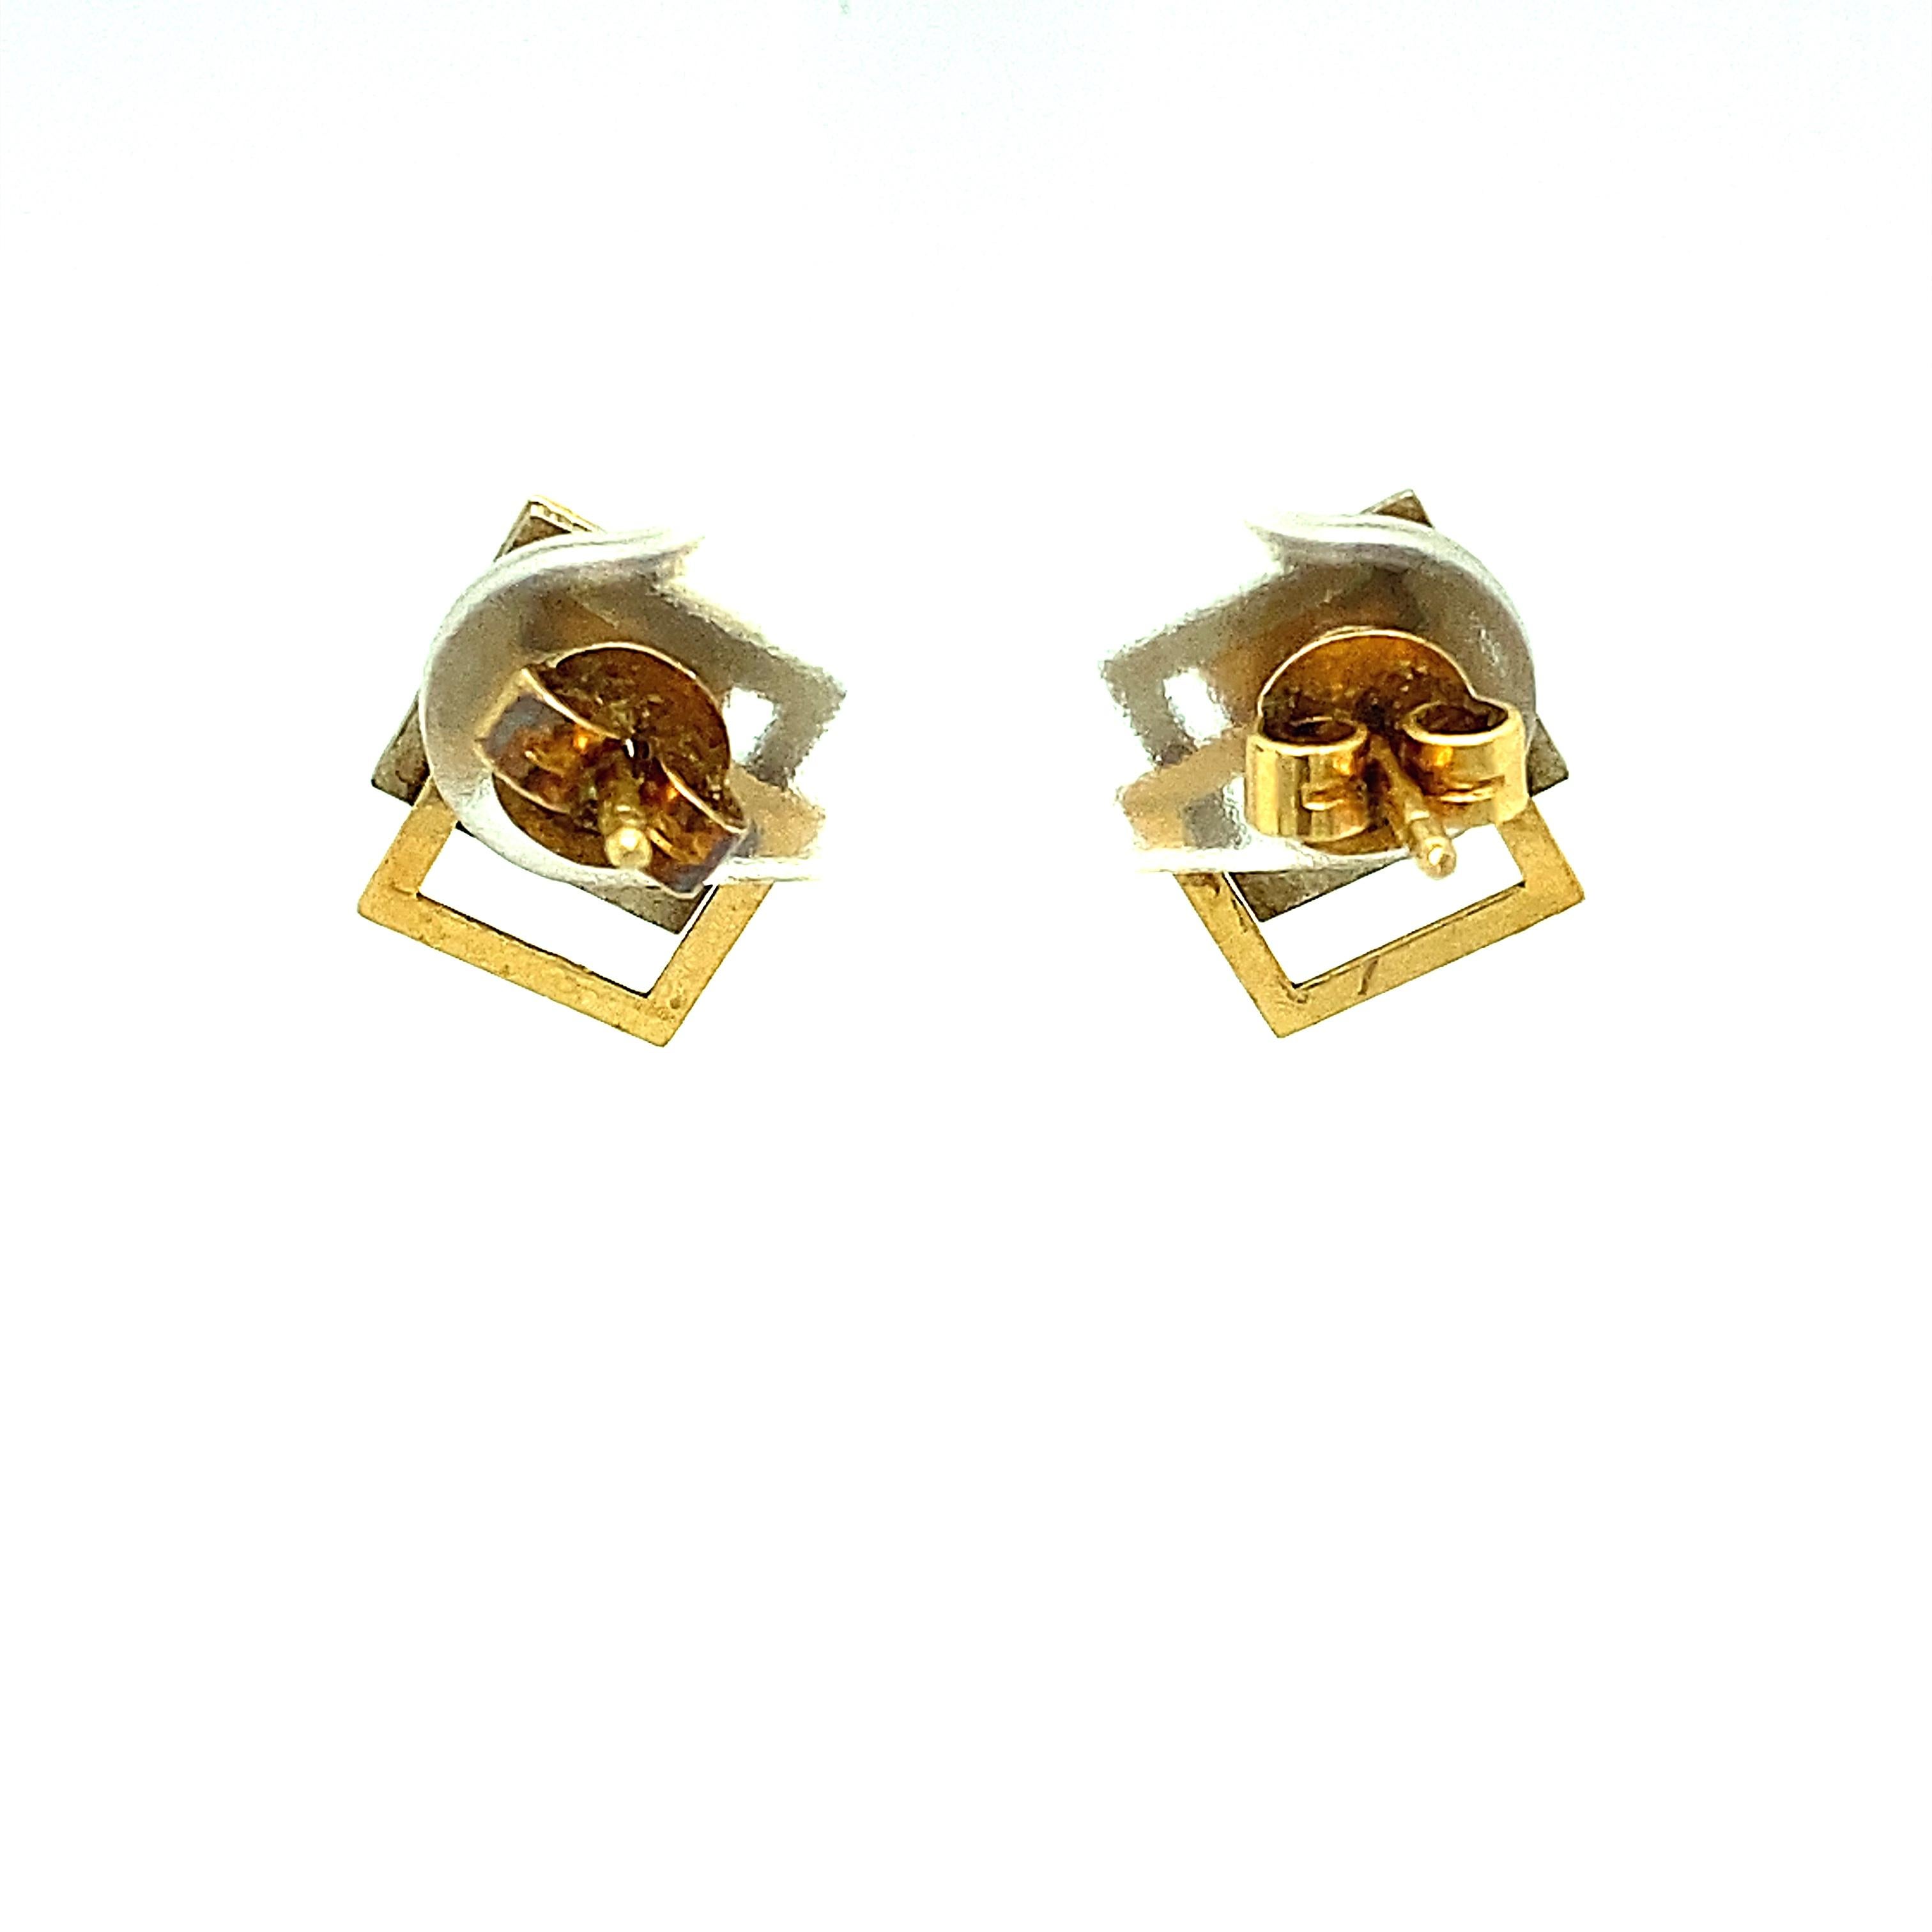 Item Details: 
Metal Type: 14 Karat Yellow and White Gold
Weight: 2 Grams
Measurements: .50 inches height x .25 inches width

Item Features:
Made in the 1940s Retro Era, these earrings are a perfect example of that time period. Showcasing an